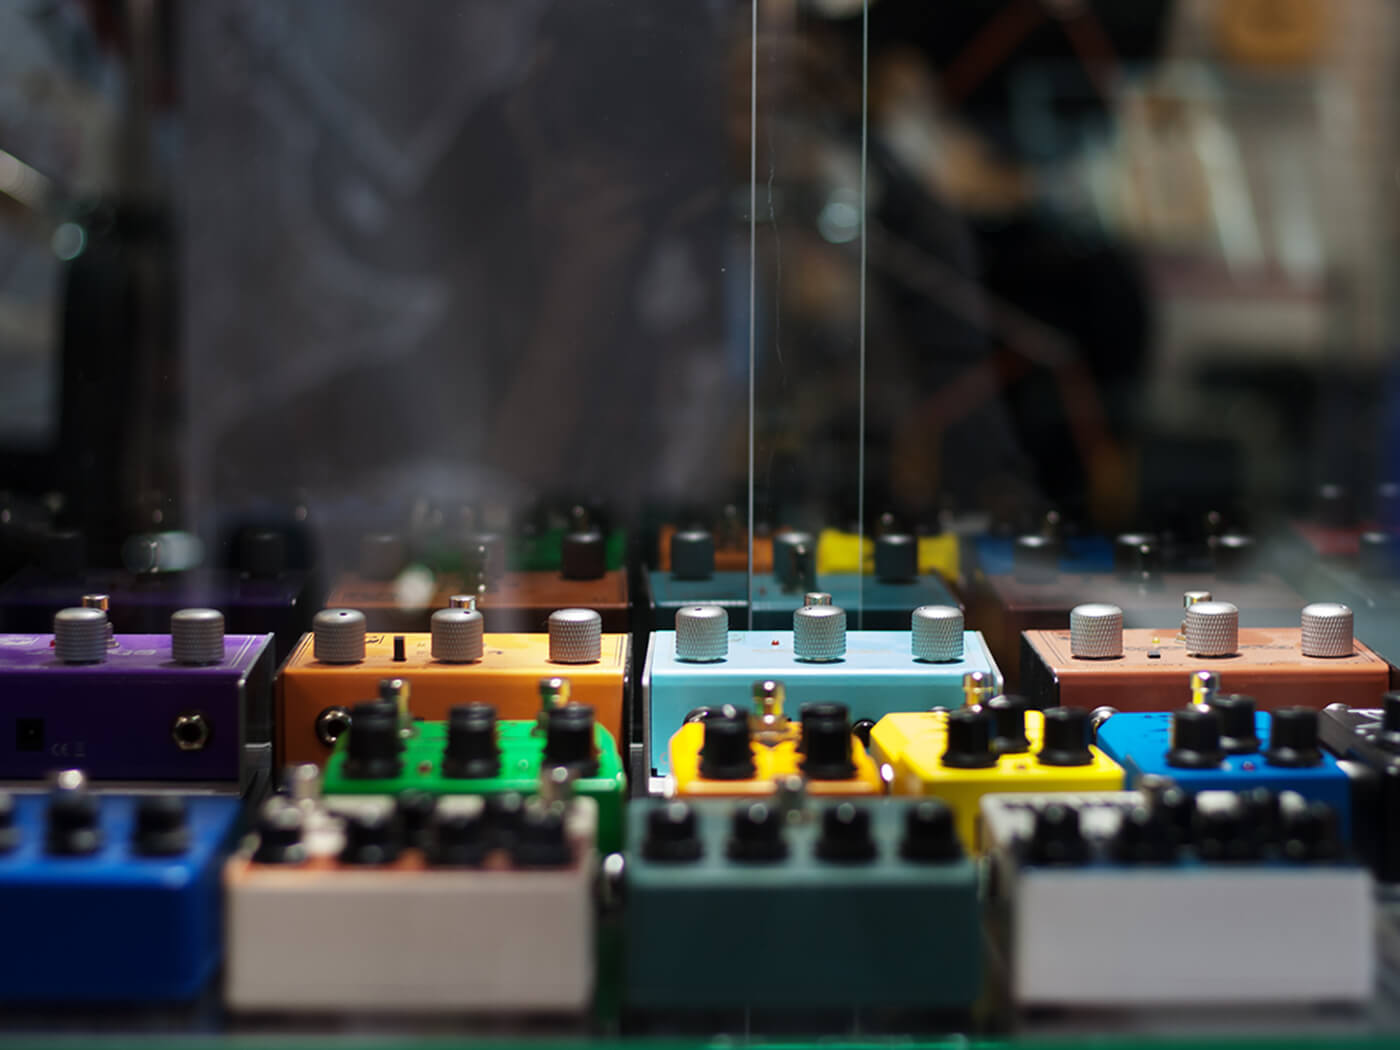 Guitar pedals on display at a music store, photo by Anastasia Prish/Getty Images